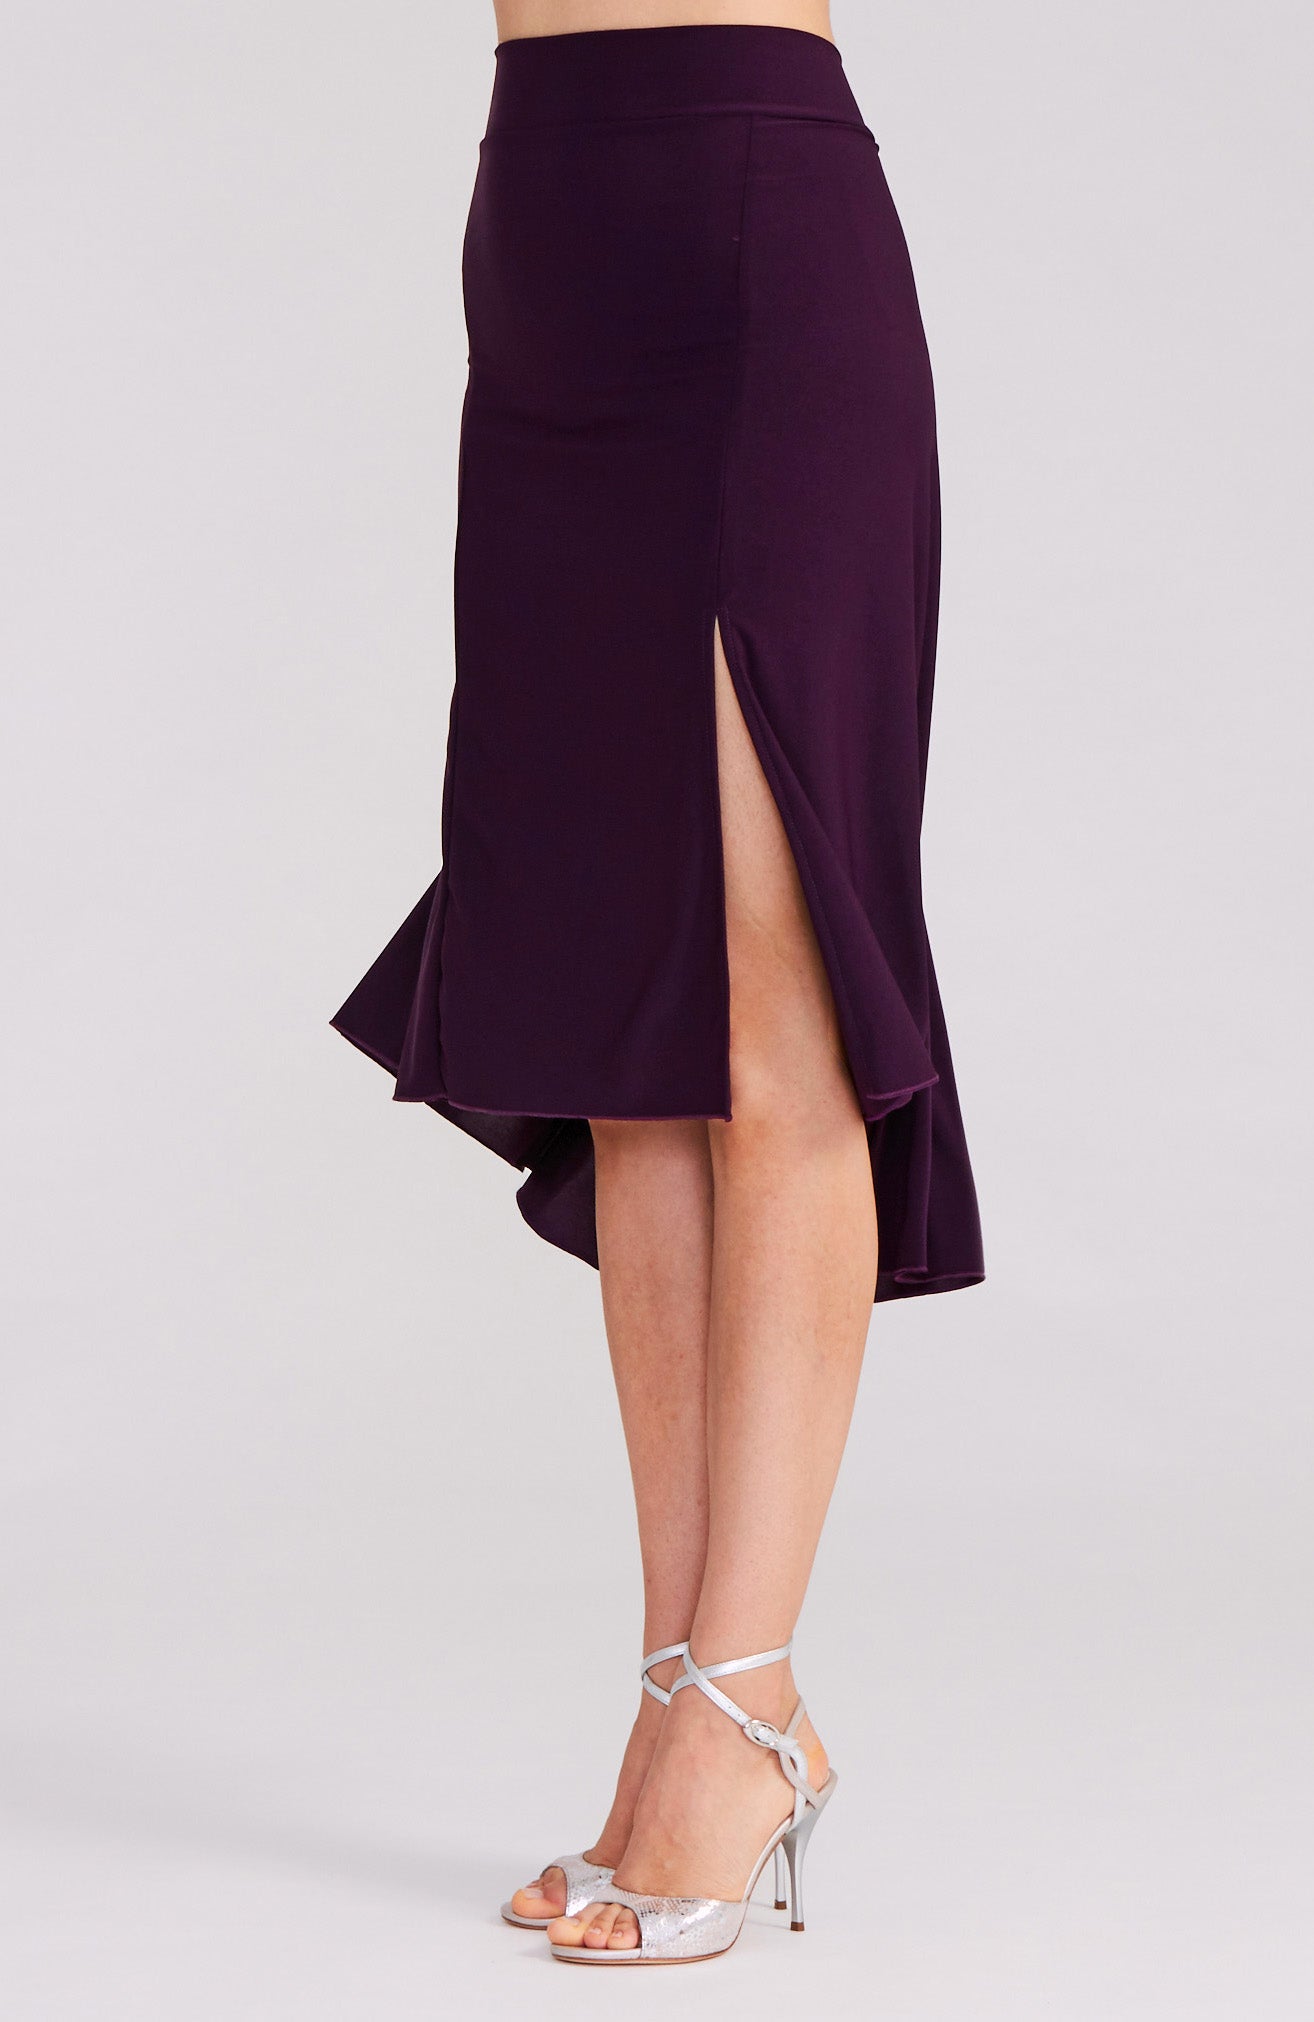 tango skirt in violet with slit